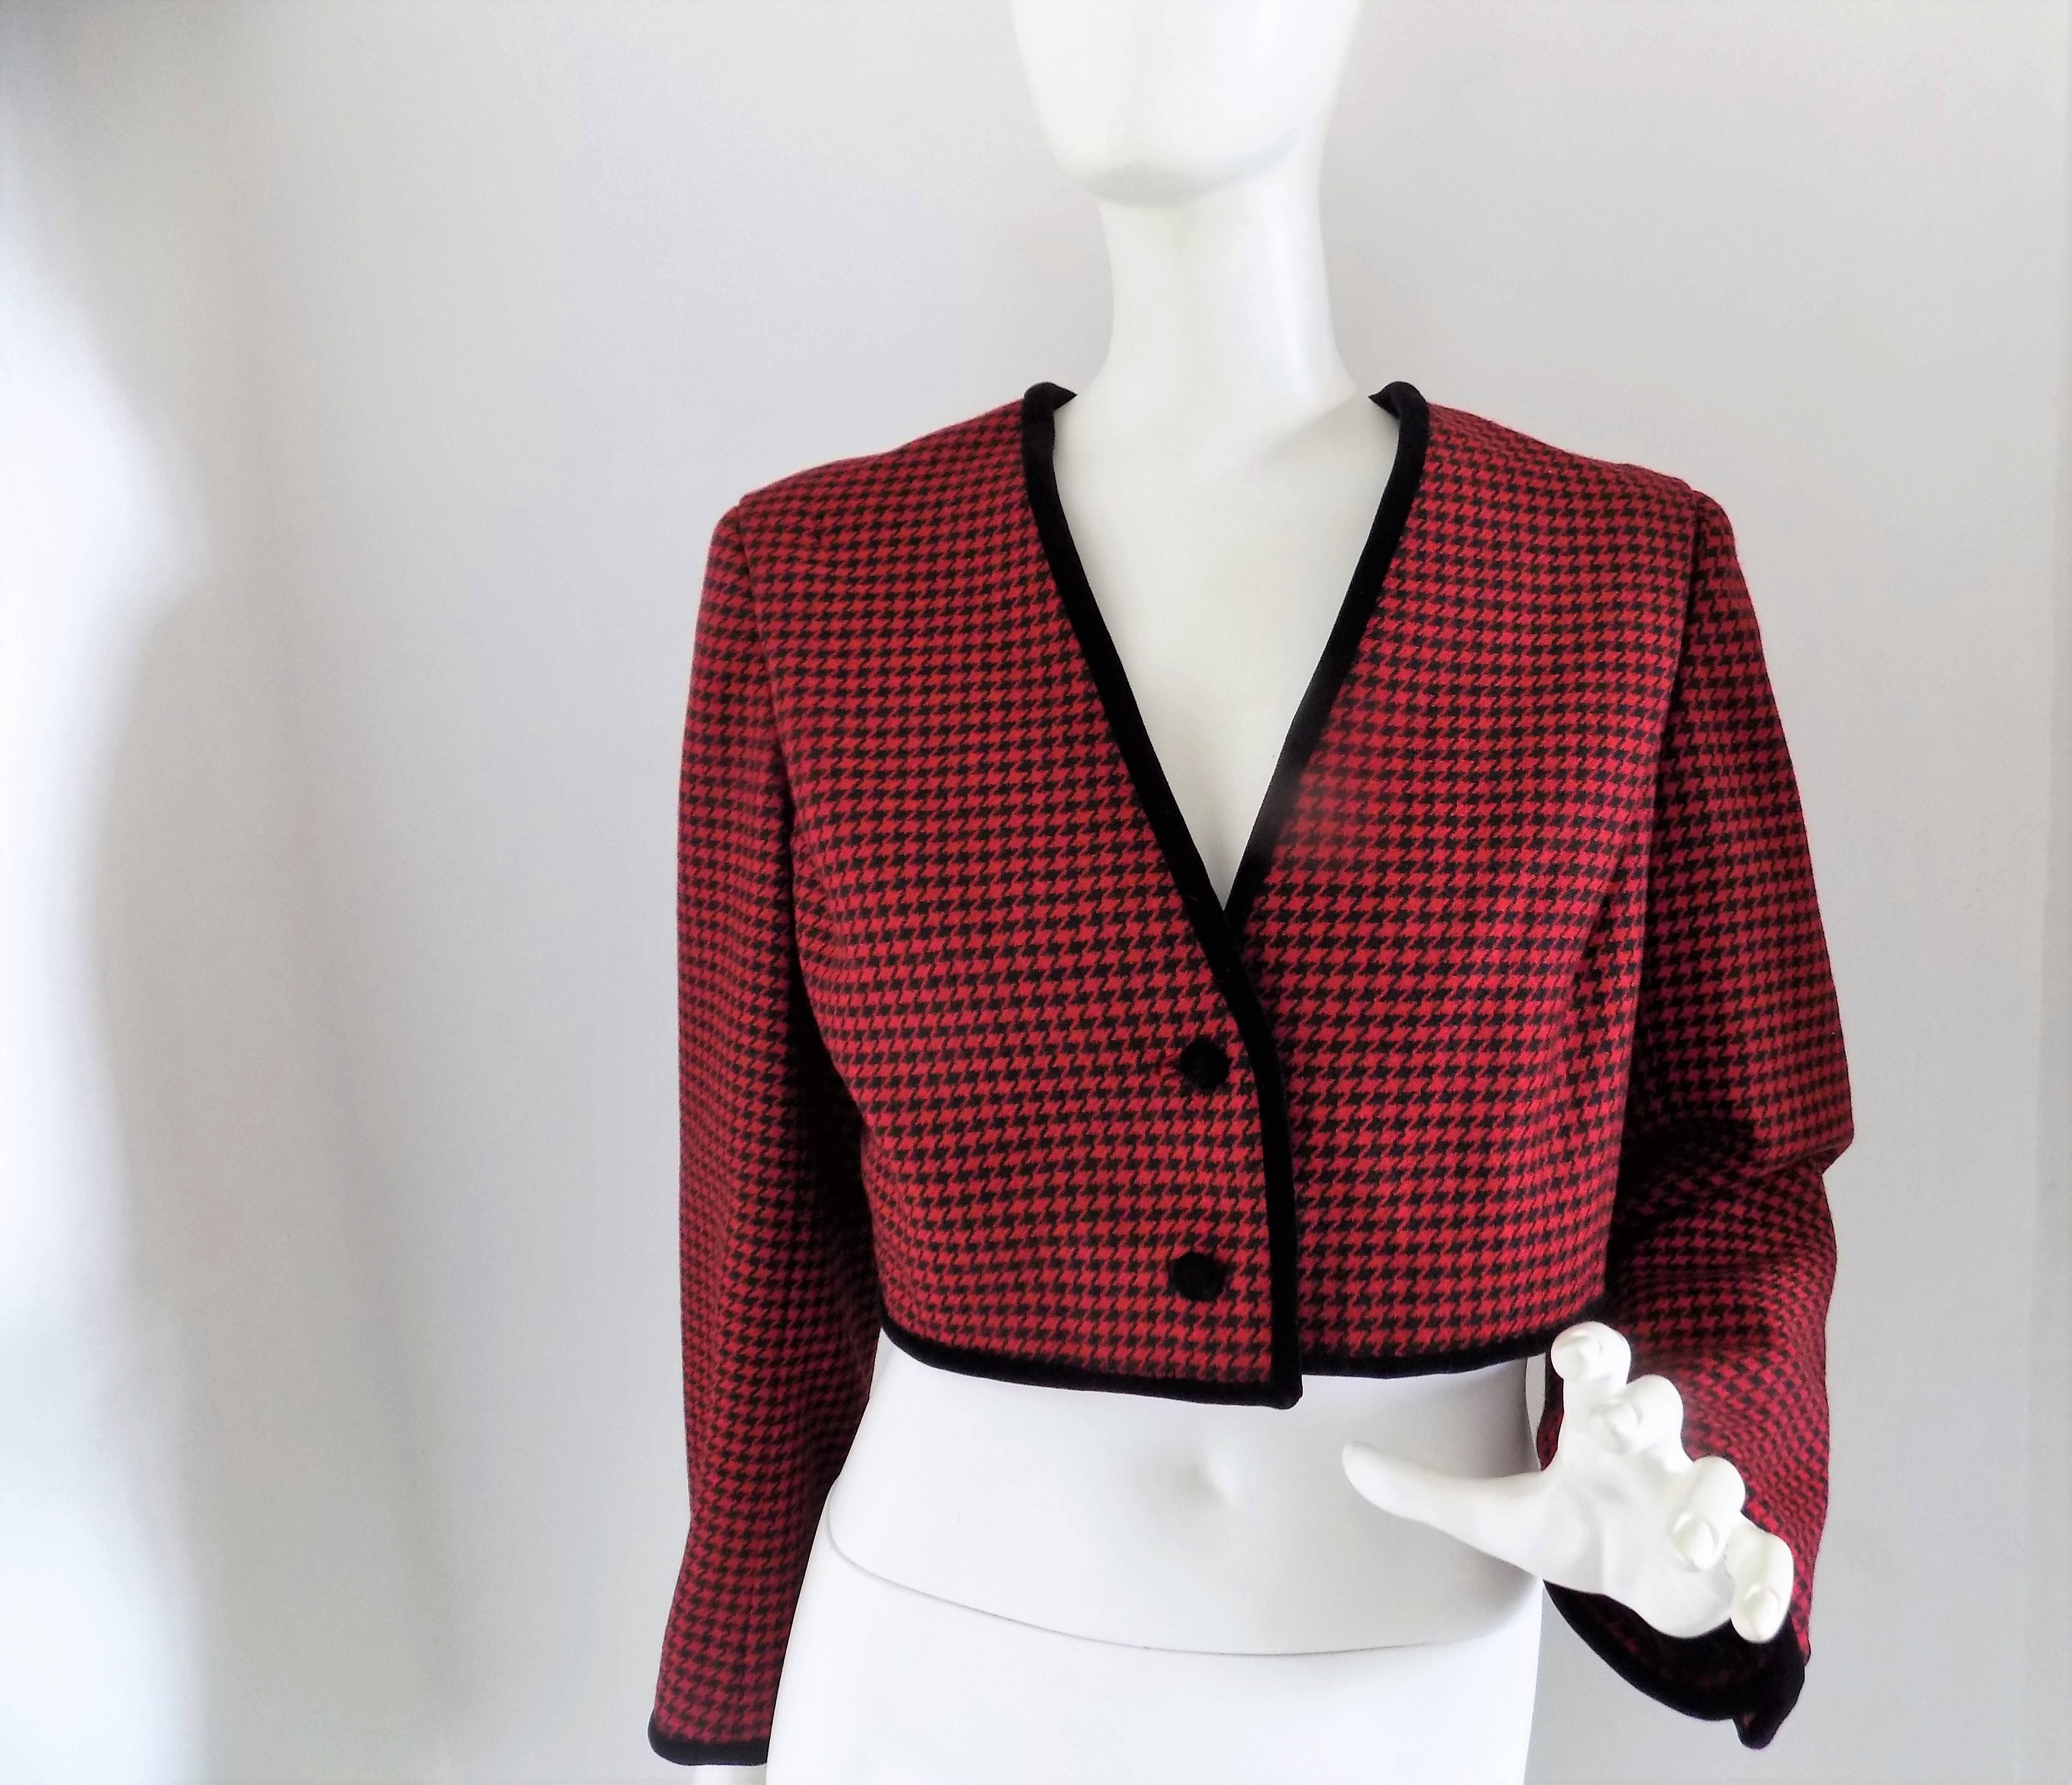 Pied de Poule red and black jacket totally made in italy